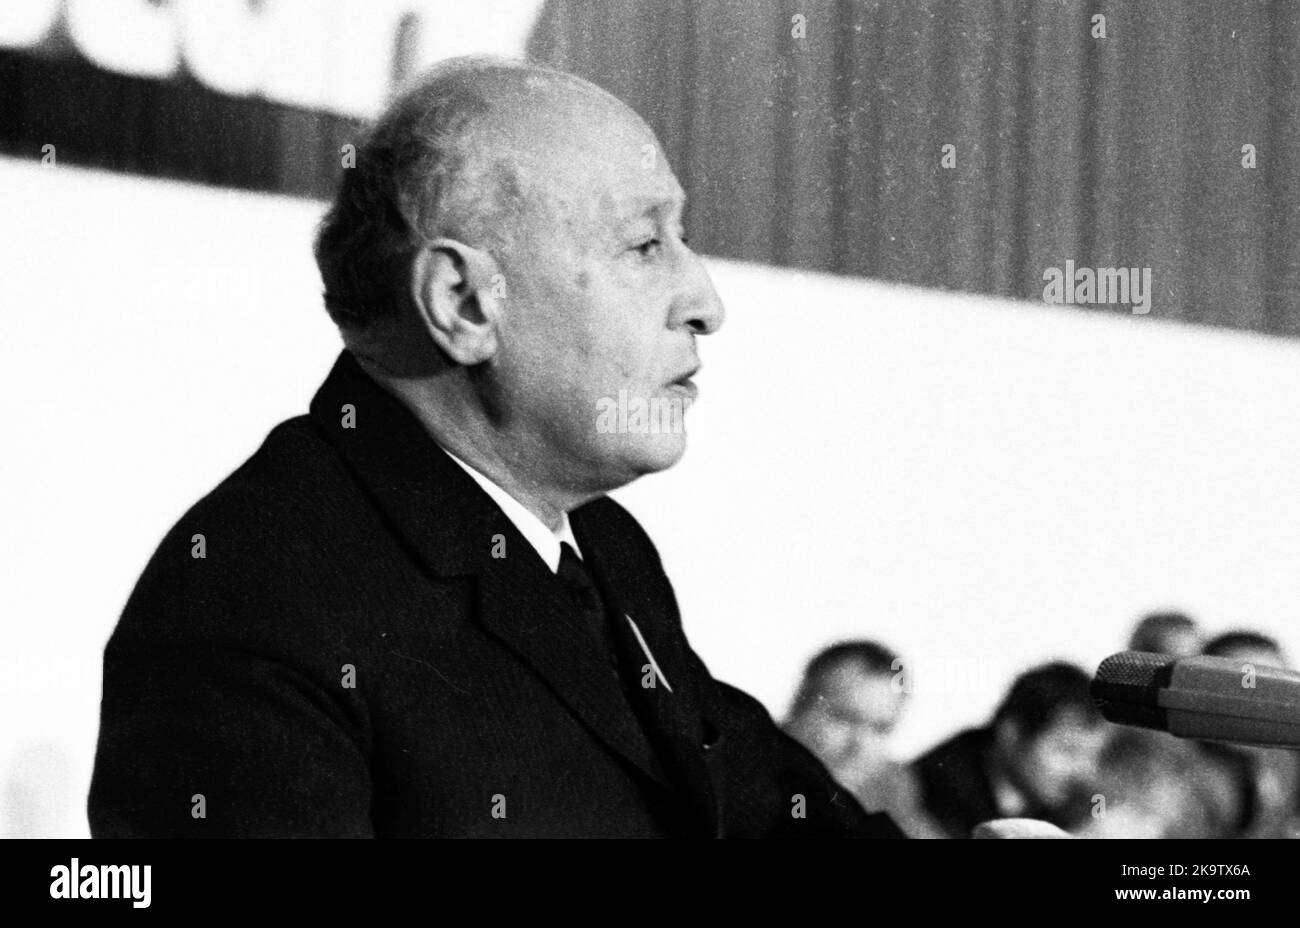 The 2nd Party Congress of the German Communist Party (DKP) was held in Duesseldorf from 25. 11. 1971 to 28. 1971. Albert Norden (SED), Germany Stock Photo